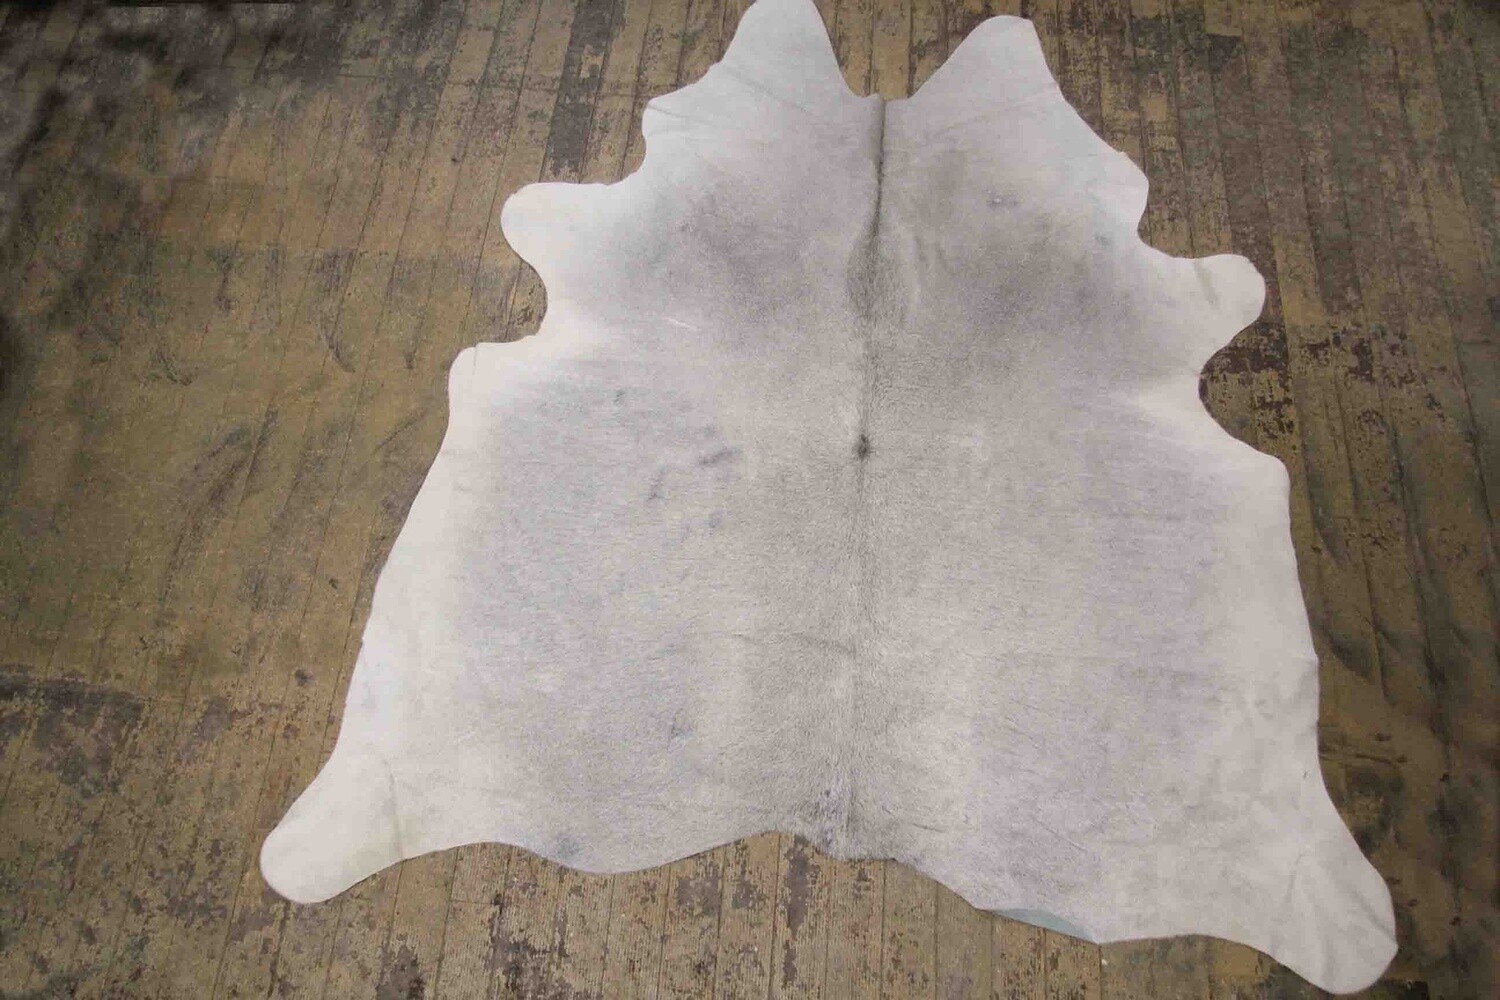 COW HIDE RUG NATURAL GREY SELECT EXTRA QUALITY 27ft2 AVERAGE 12072